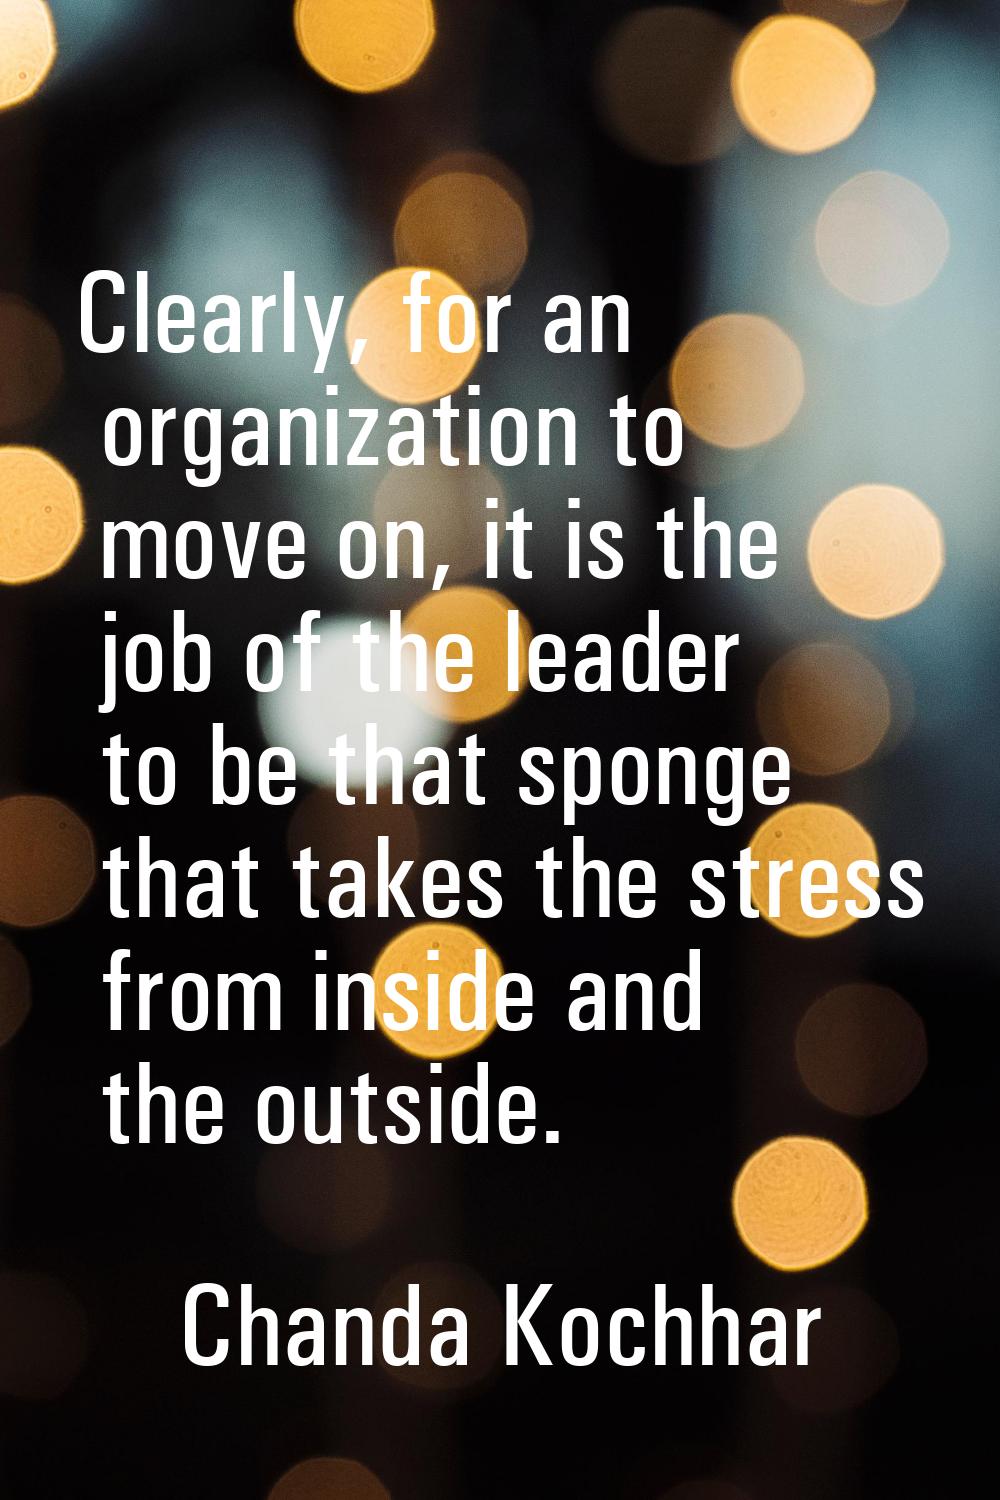 Clearly, for an organization to move on, it is the job of the leader to be that sponge that takes t